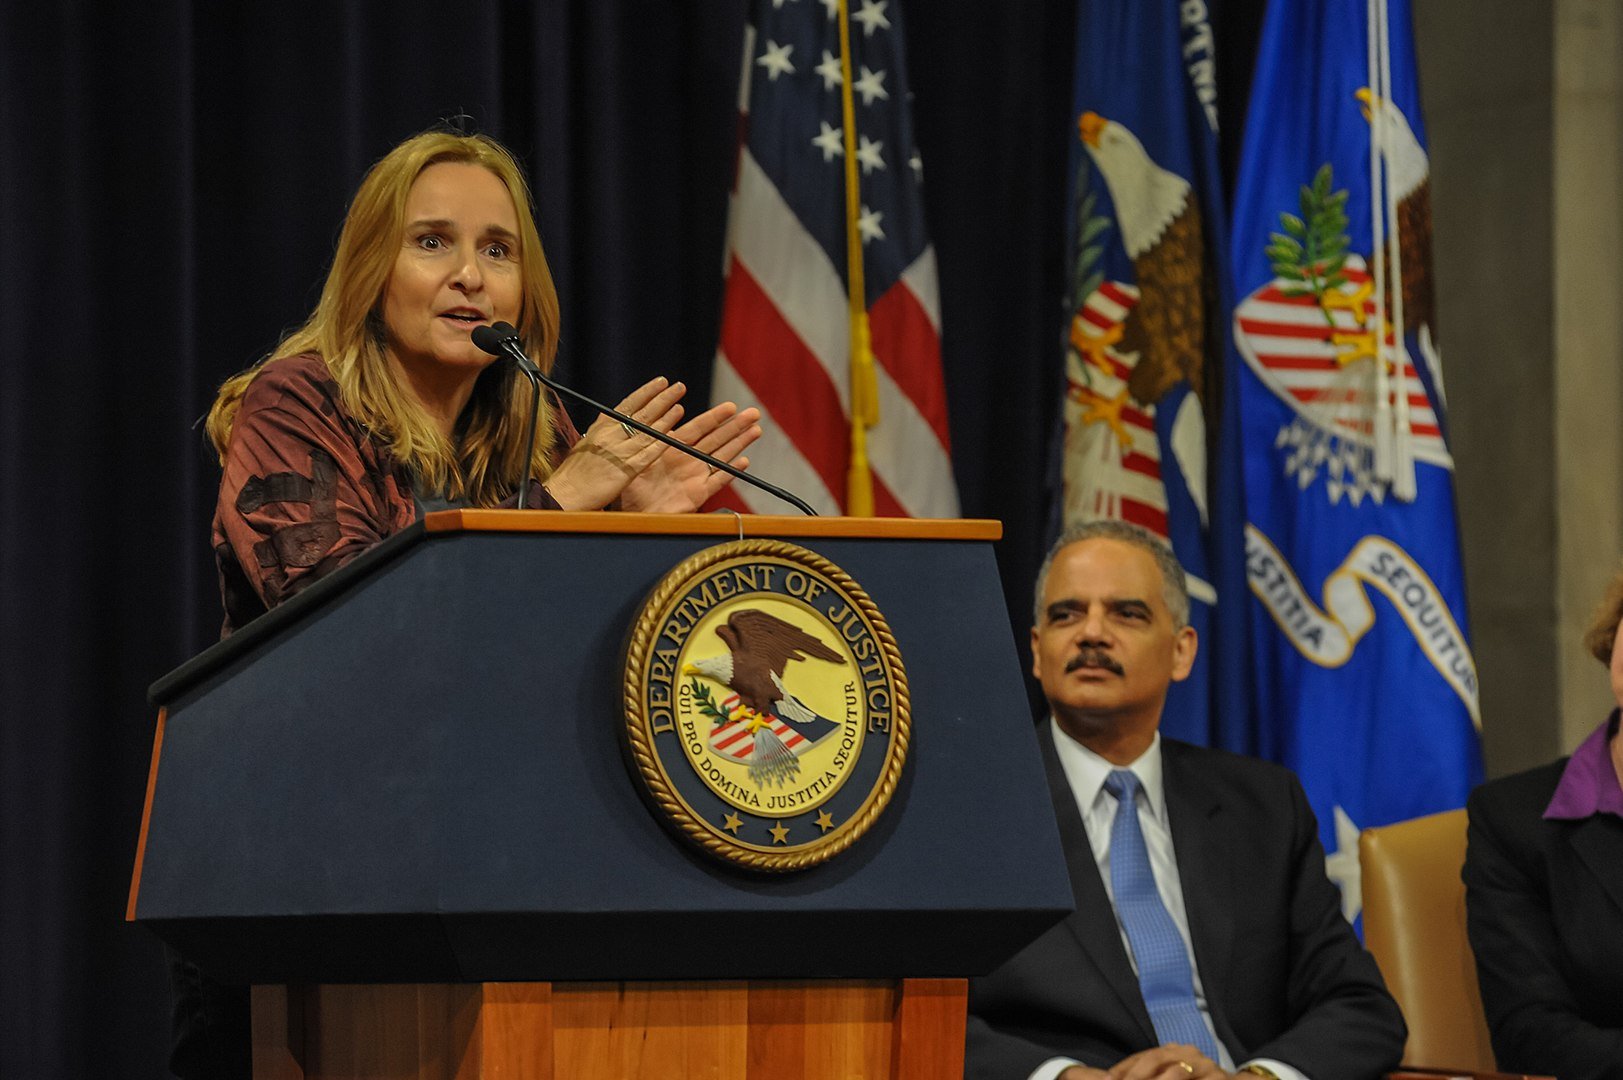 Melissa Etheridge shared her personal experiences of advocating for the LGBT community at a United States Department of Justice Event, June, 2013 | Photo: GettyImages